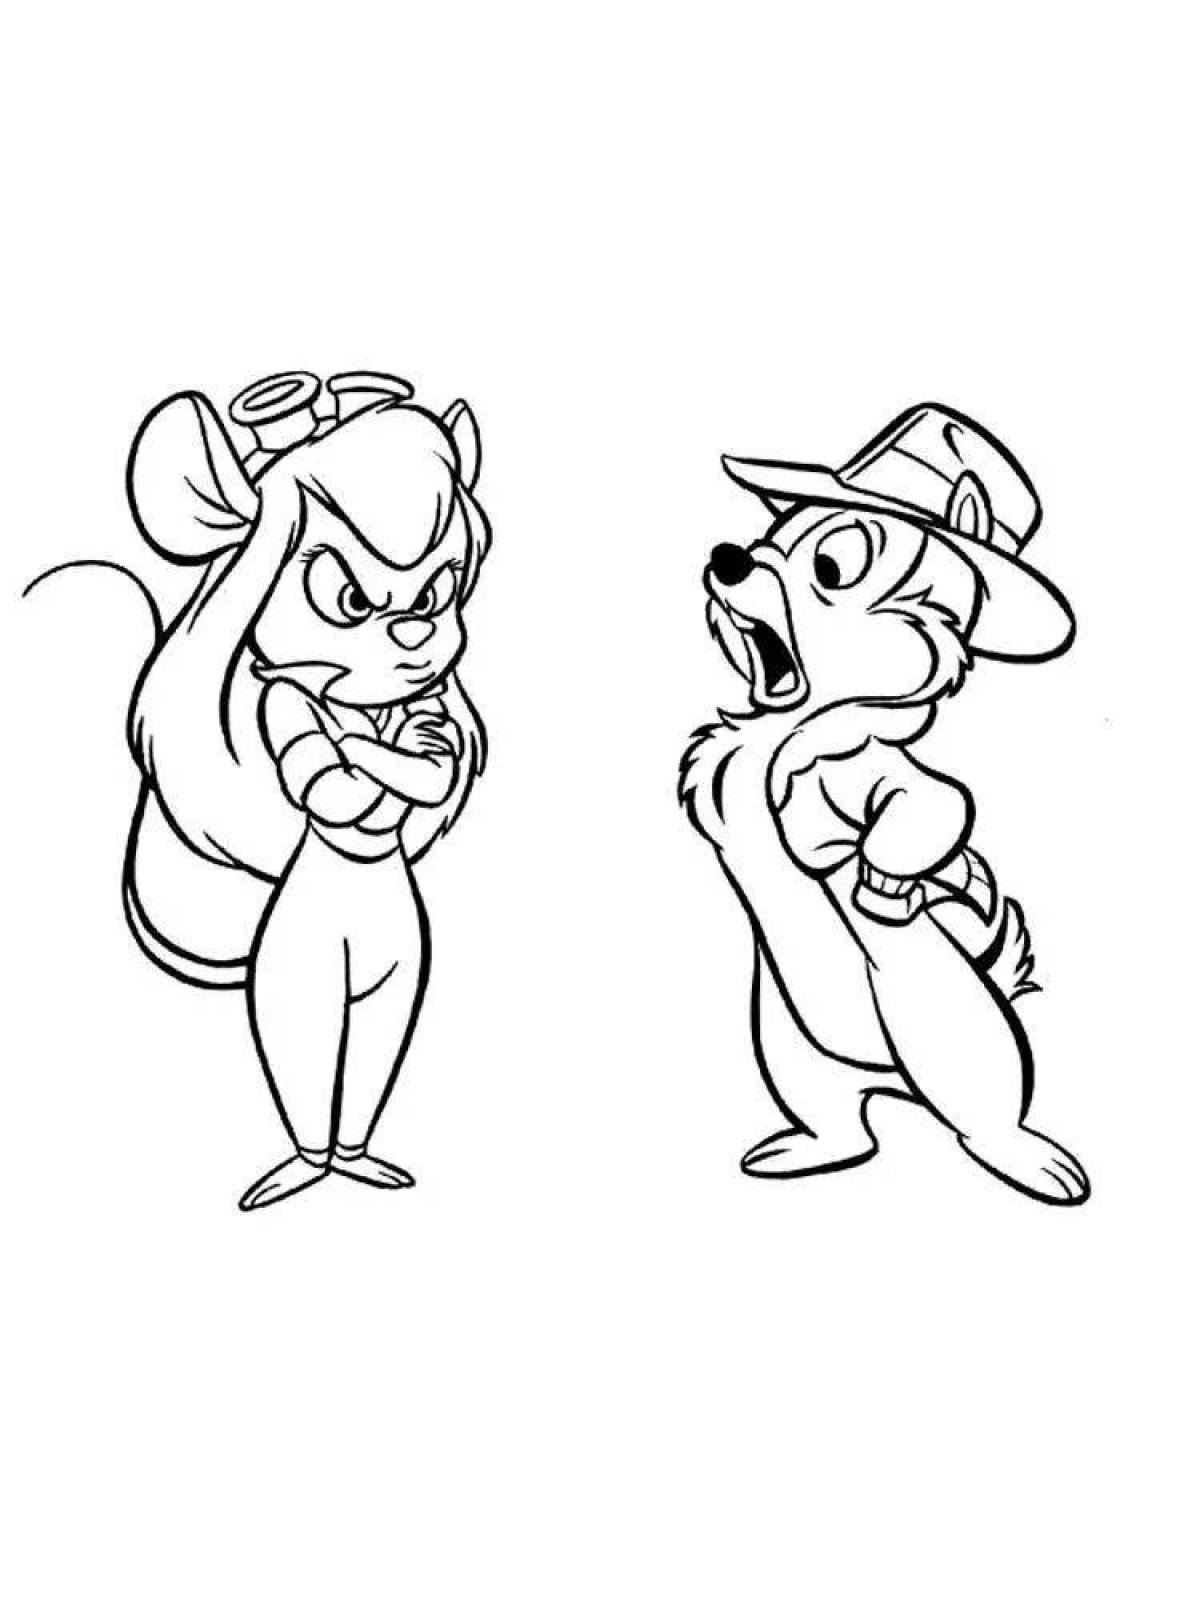 Cute chip and dale coloring page